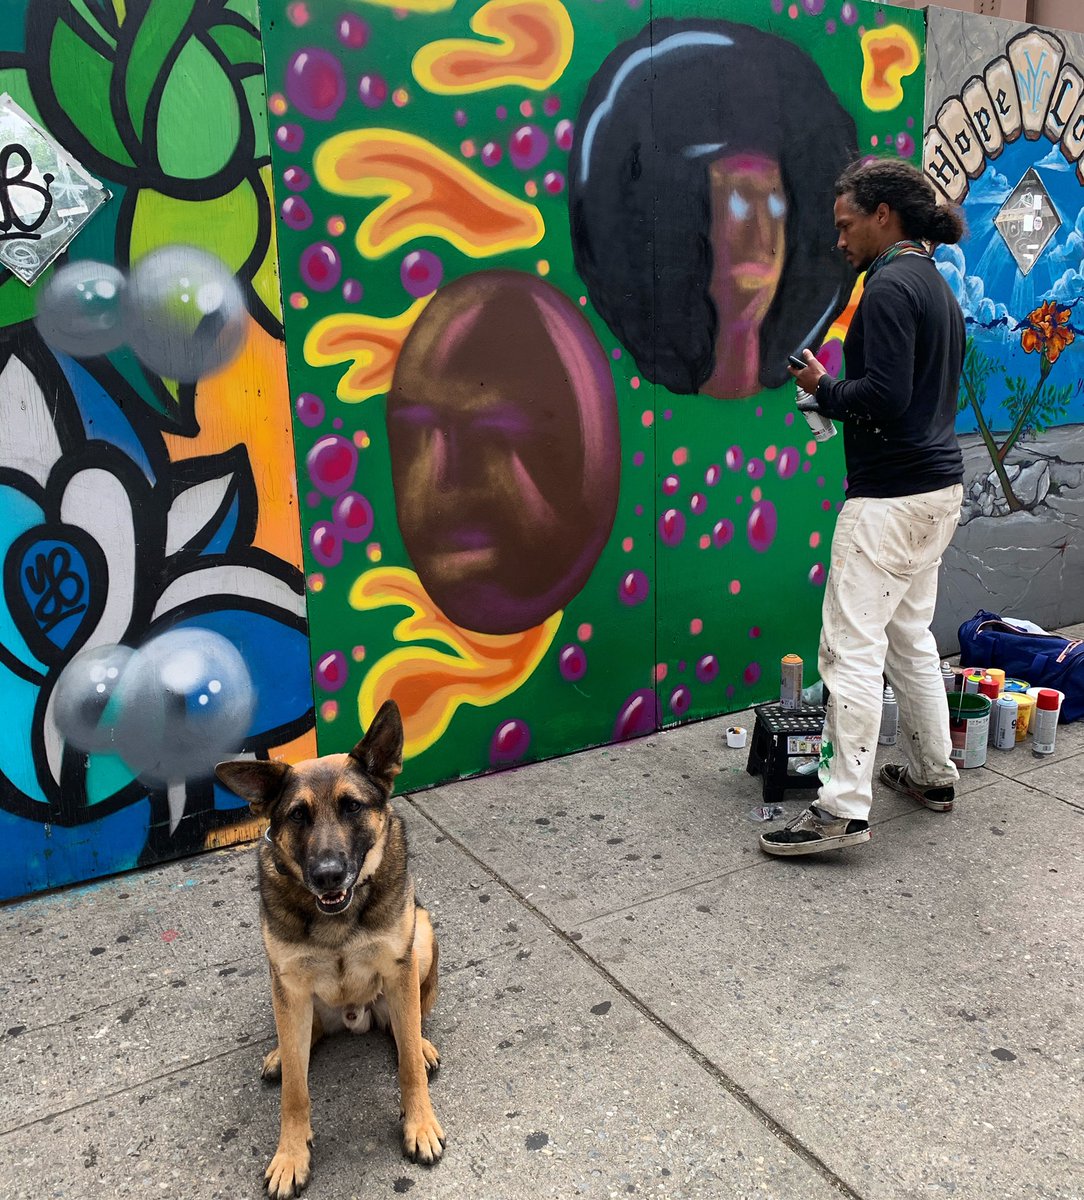 It’s great to see #NYC come alive as restrictions ease.  Got to meet the artist Art Man Dan create some beautiful work in Harlem. Nice job 👍

#LoveK9Louie #meettheartist #harlemnyc